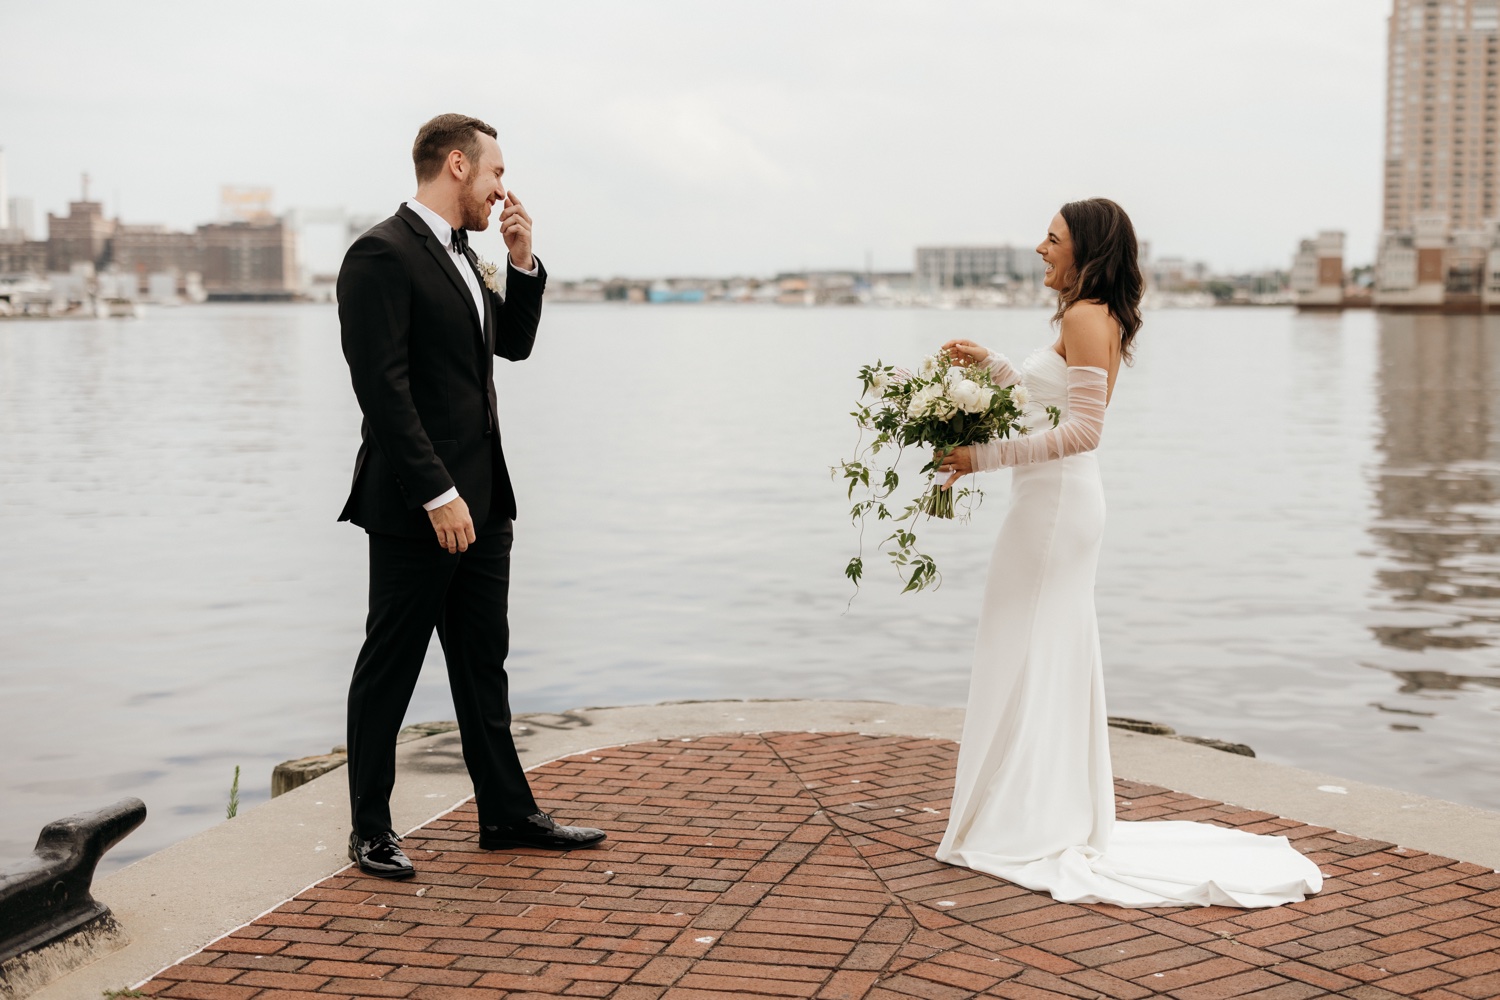 A bride and groom having their first look by the water. The bride is laughing and smiling while the groom is covering his face in shock and happiness.